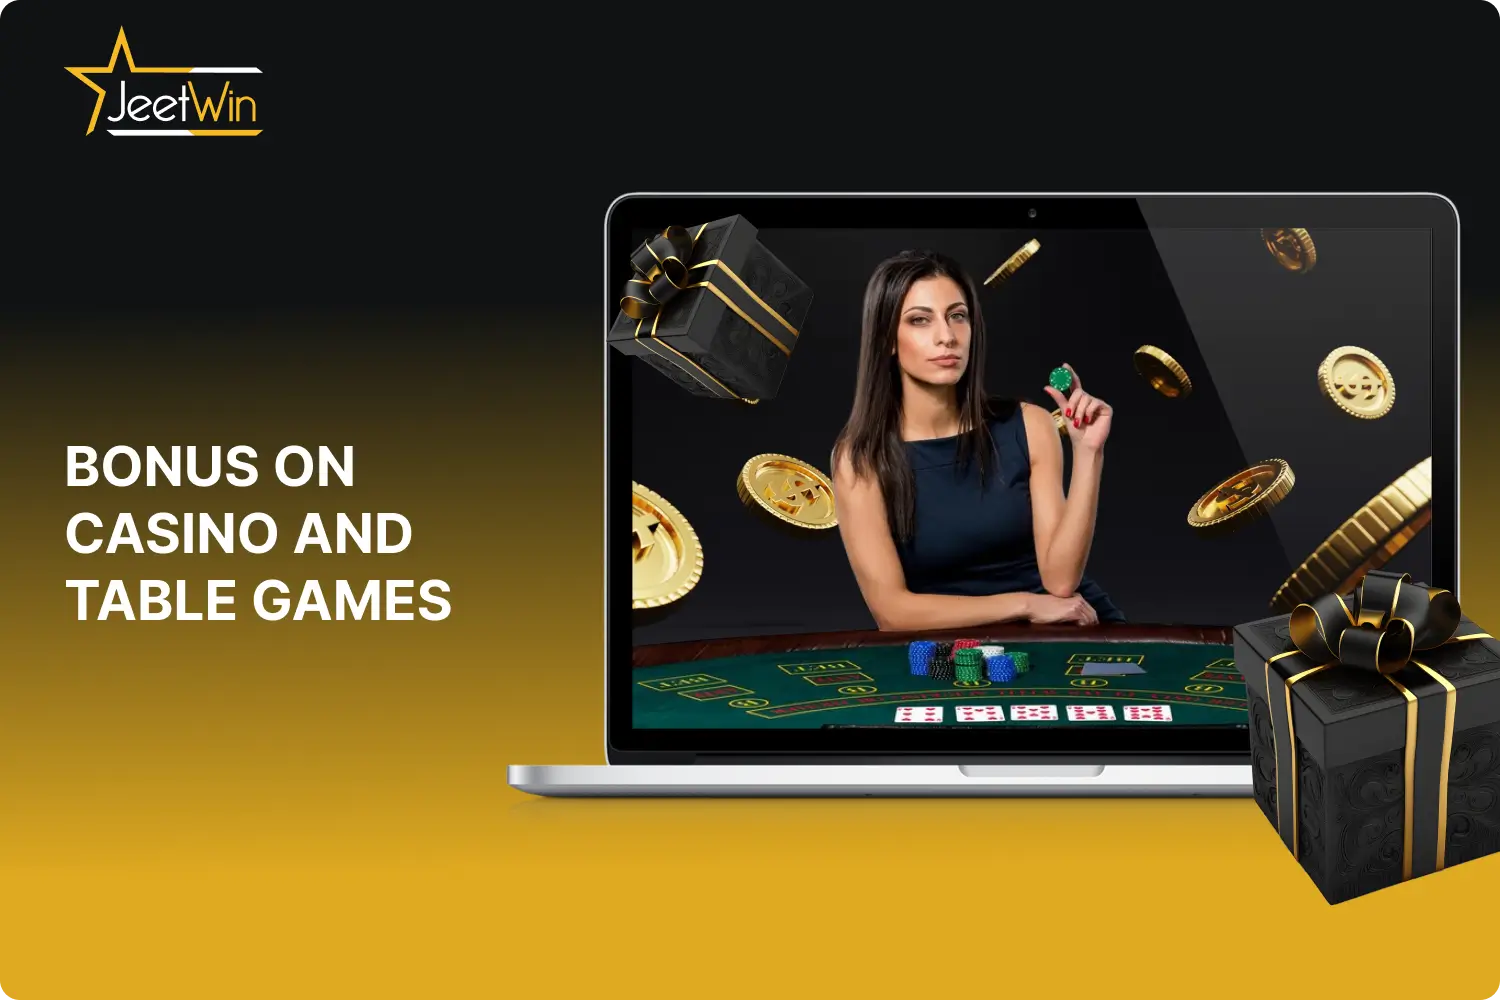 A nice bonus from Jeetwin awaits casino and table games gamblers from India